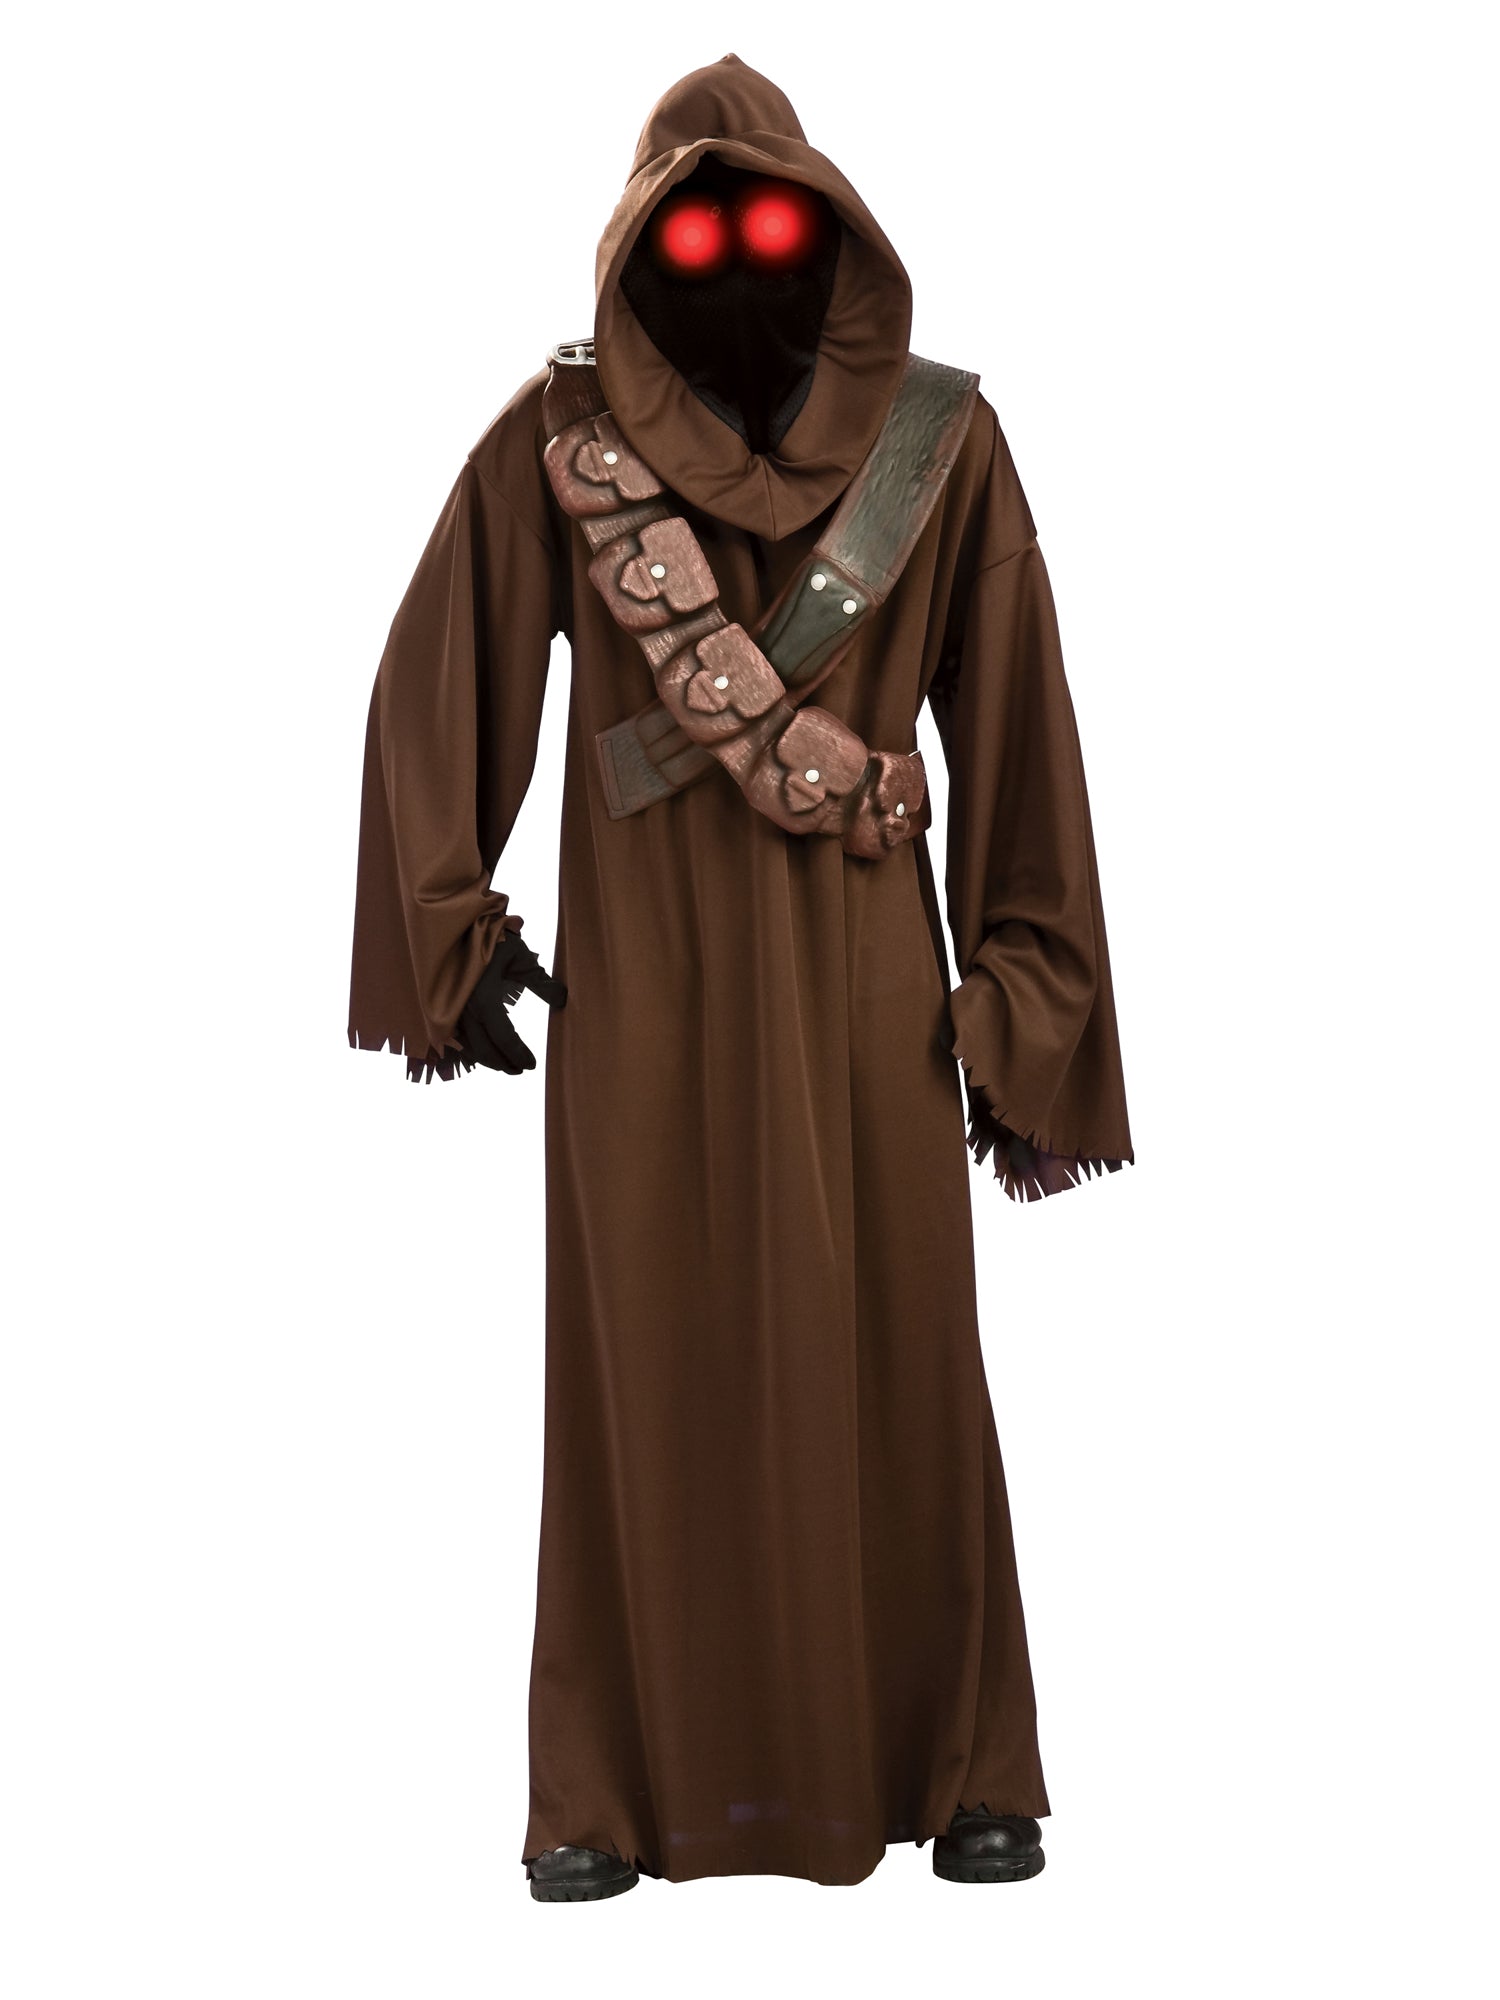 Jawa, A New Hope, Episode IV, A New Hope, Multi, Star Wars, Adult Costume, Standard, Front